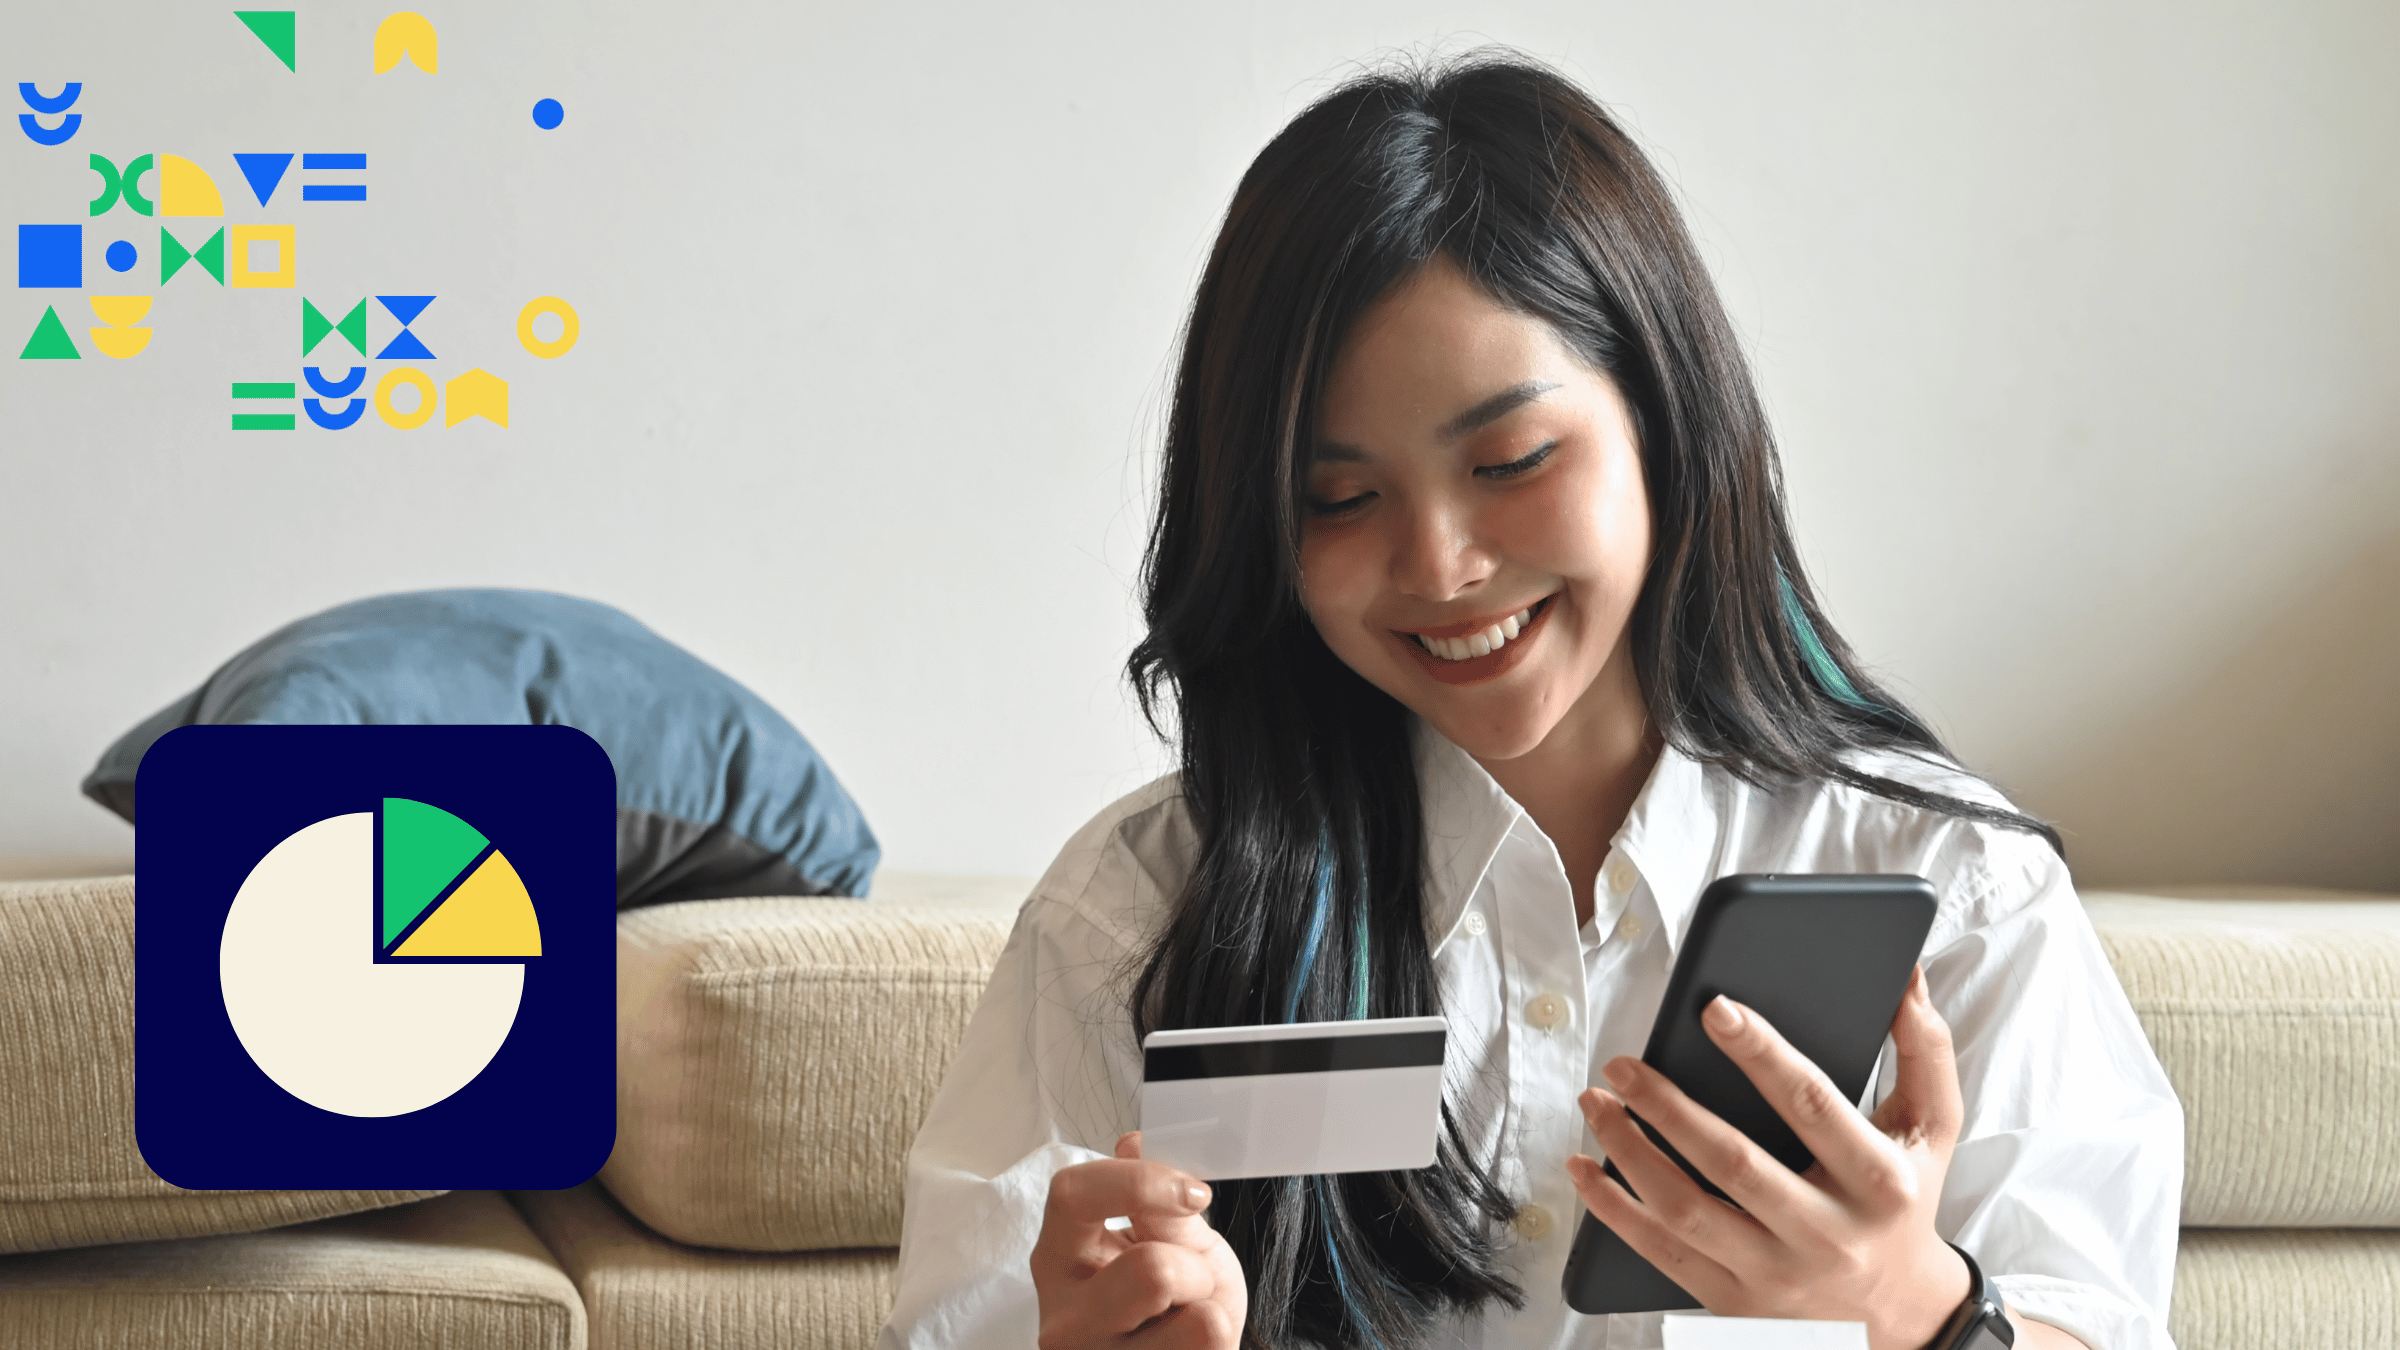 Image of a young woman sitting down and looking at a phone and debit card with an icon of a budget overlaid to showcase the theme of personal finance